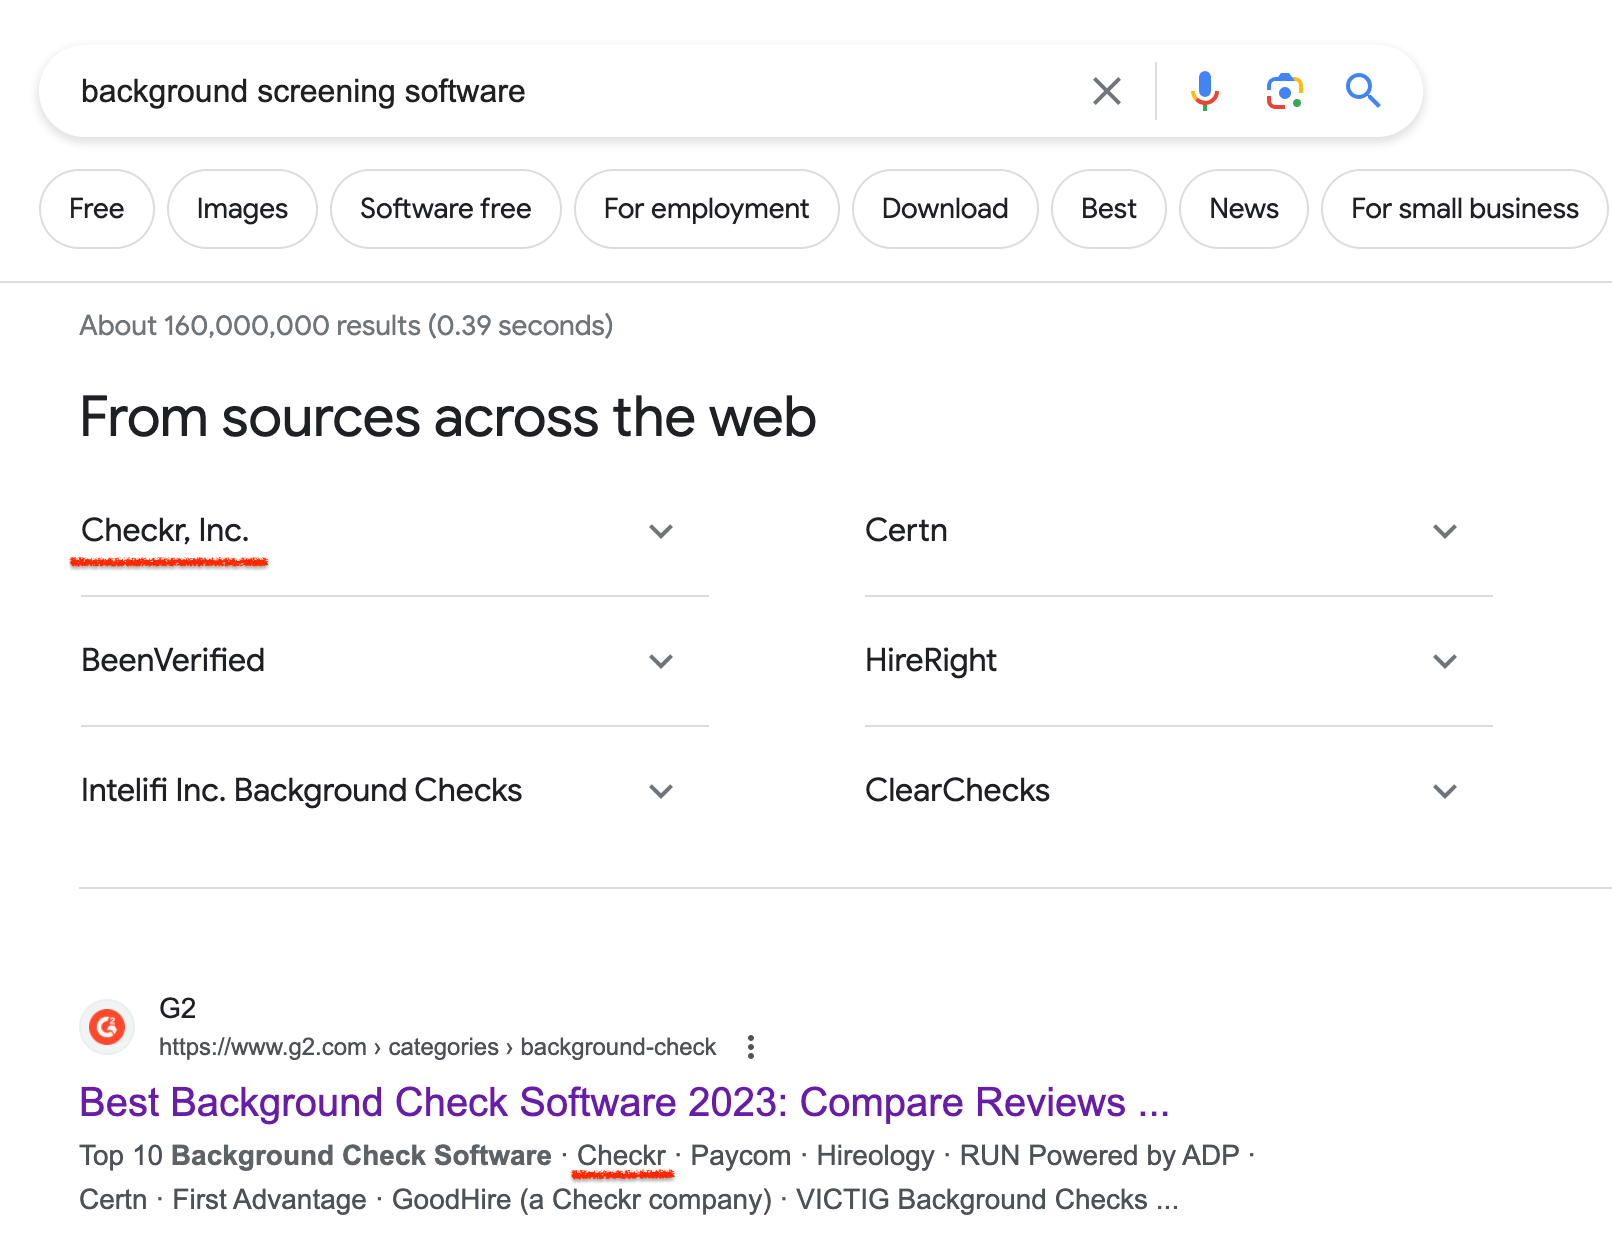 Search results for "background screening software" showing Checkr listed first